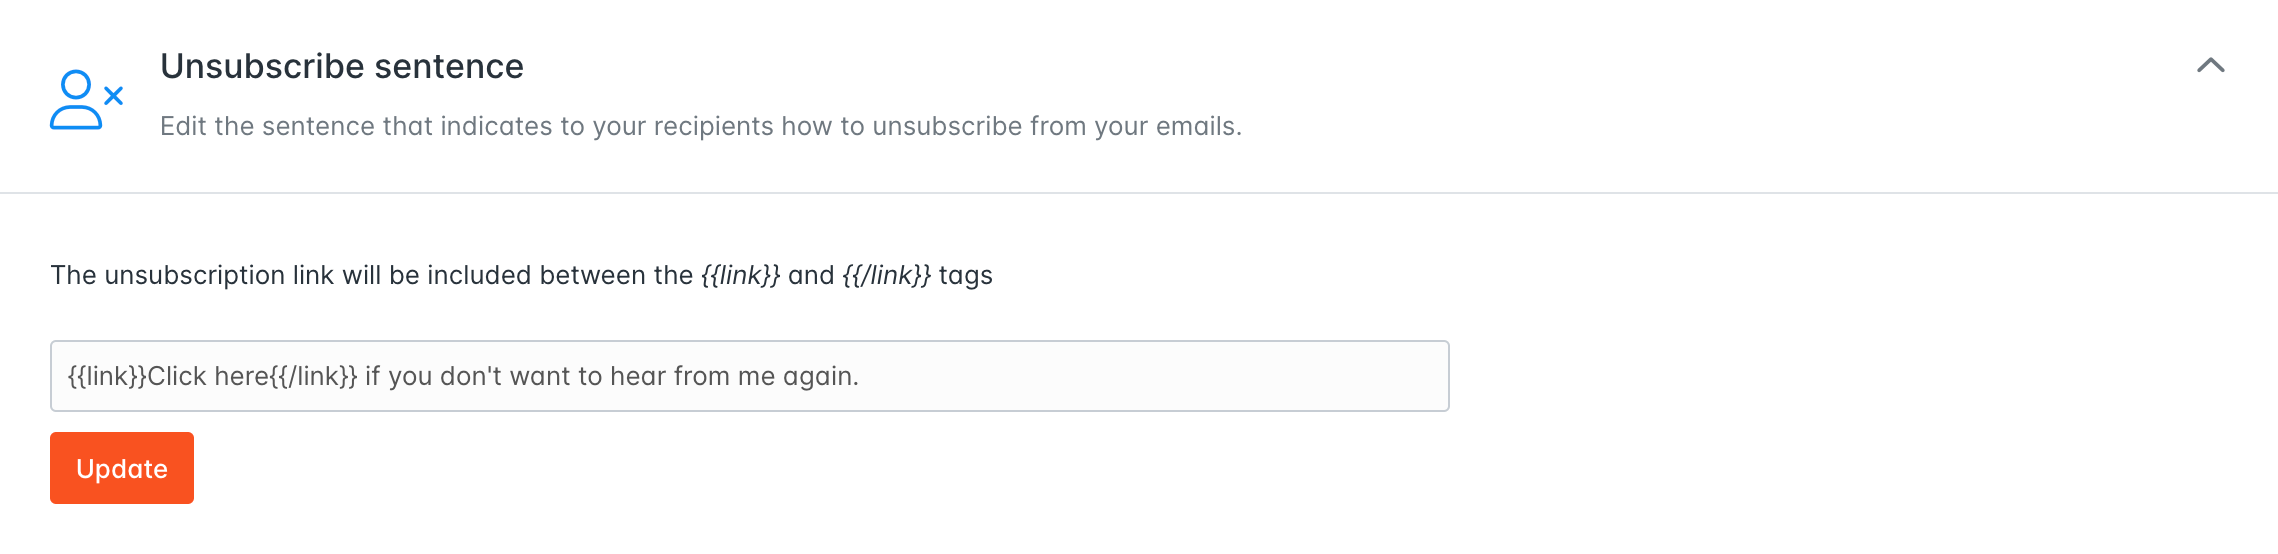 Customizing the unsubscribe text in Hunter Campaigns